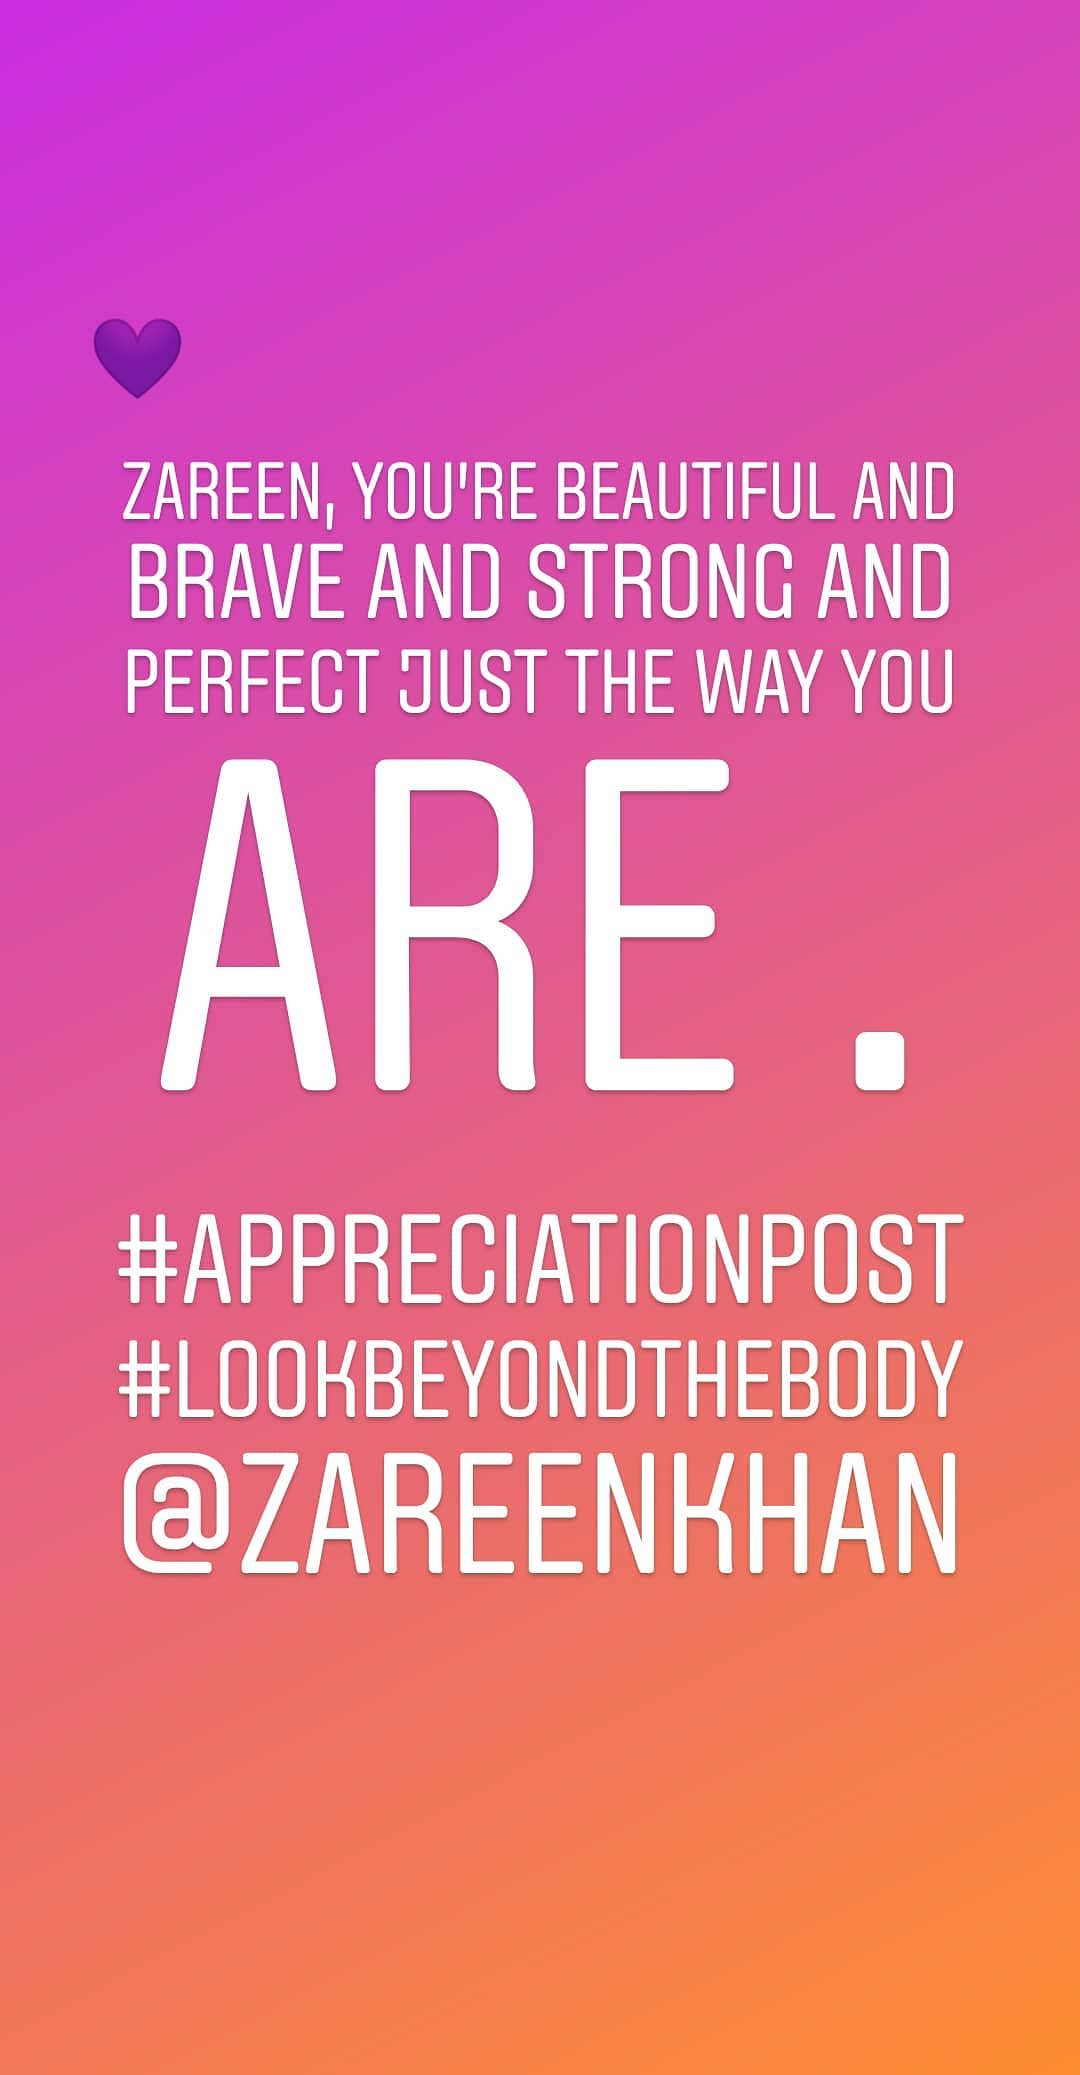 Zareen had been trolled over a photo where her stretch marks were visible.